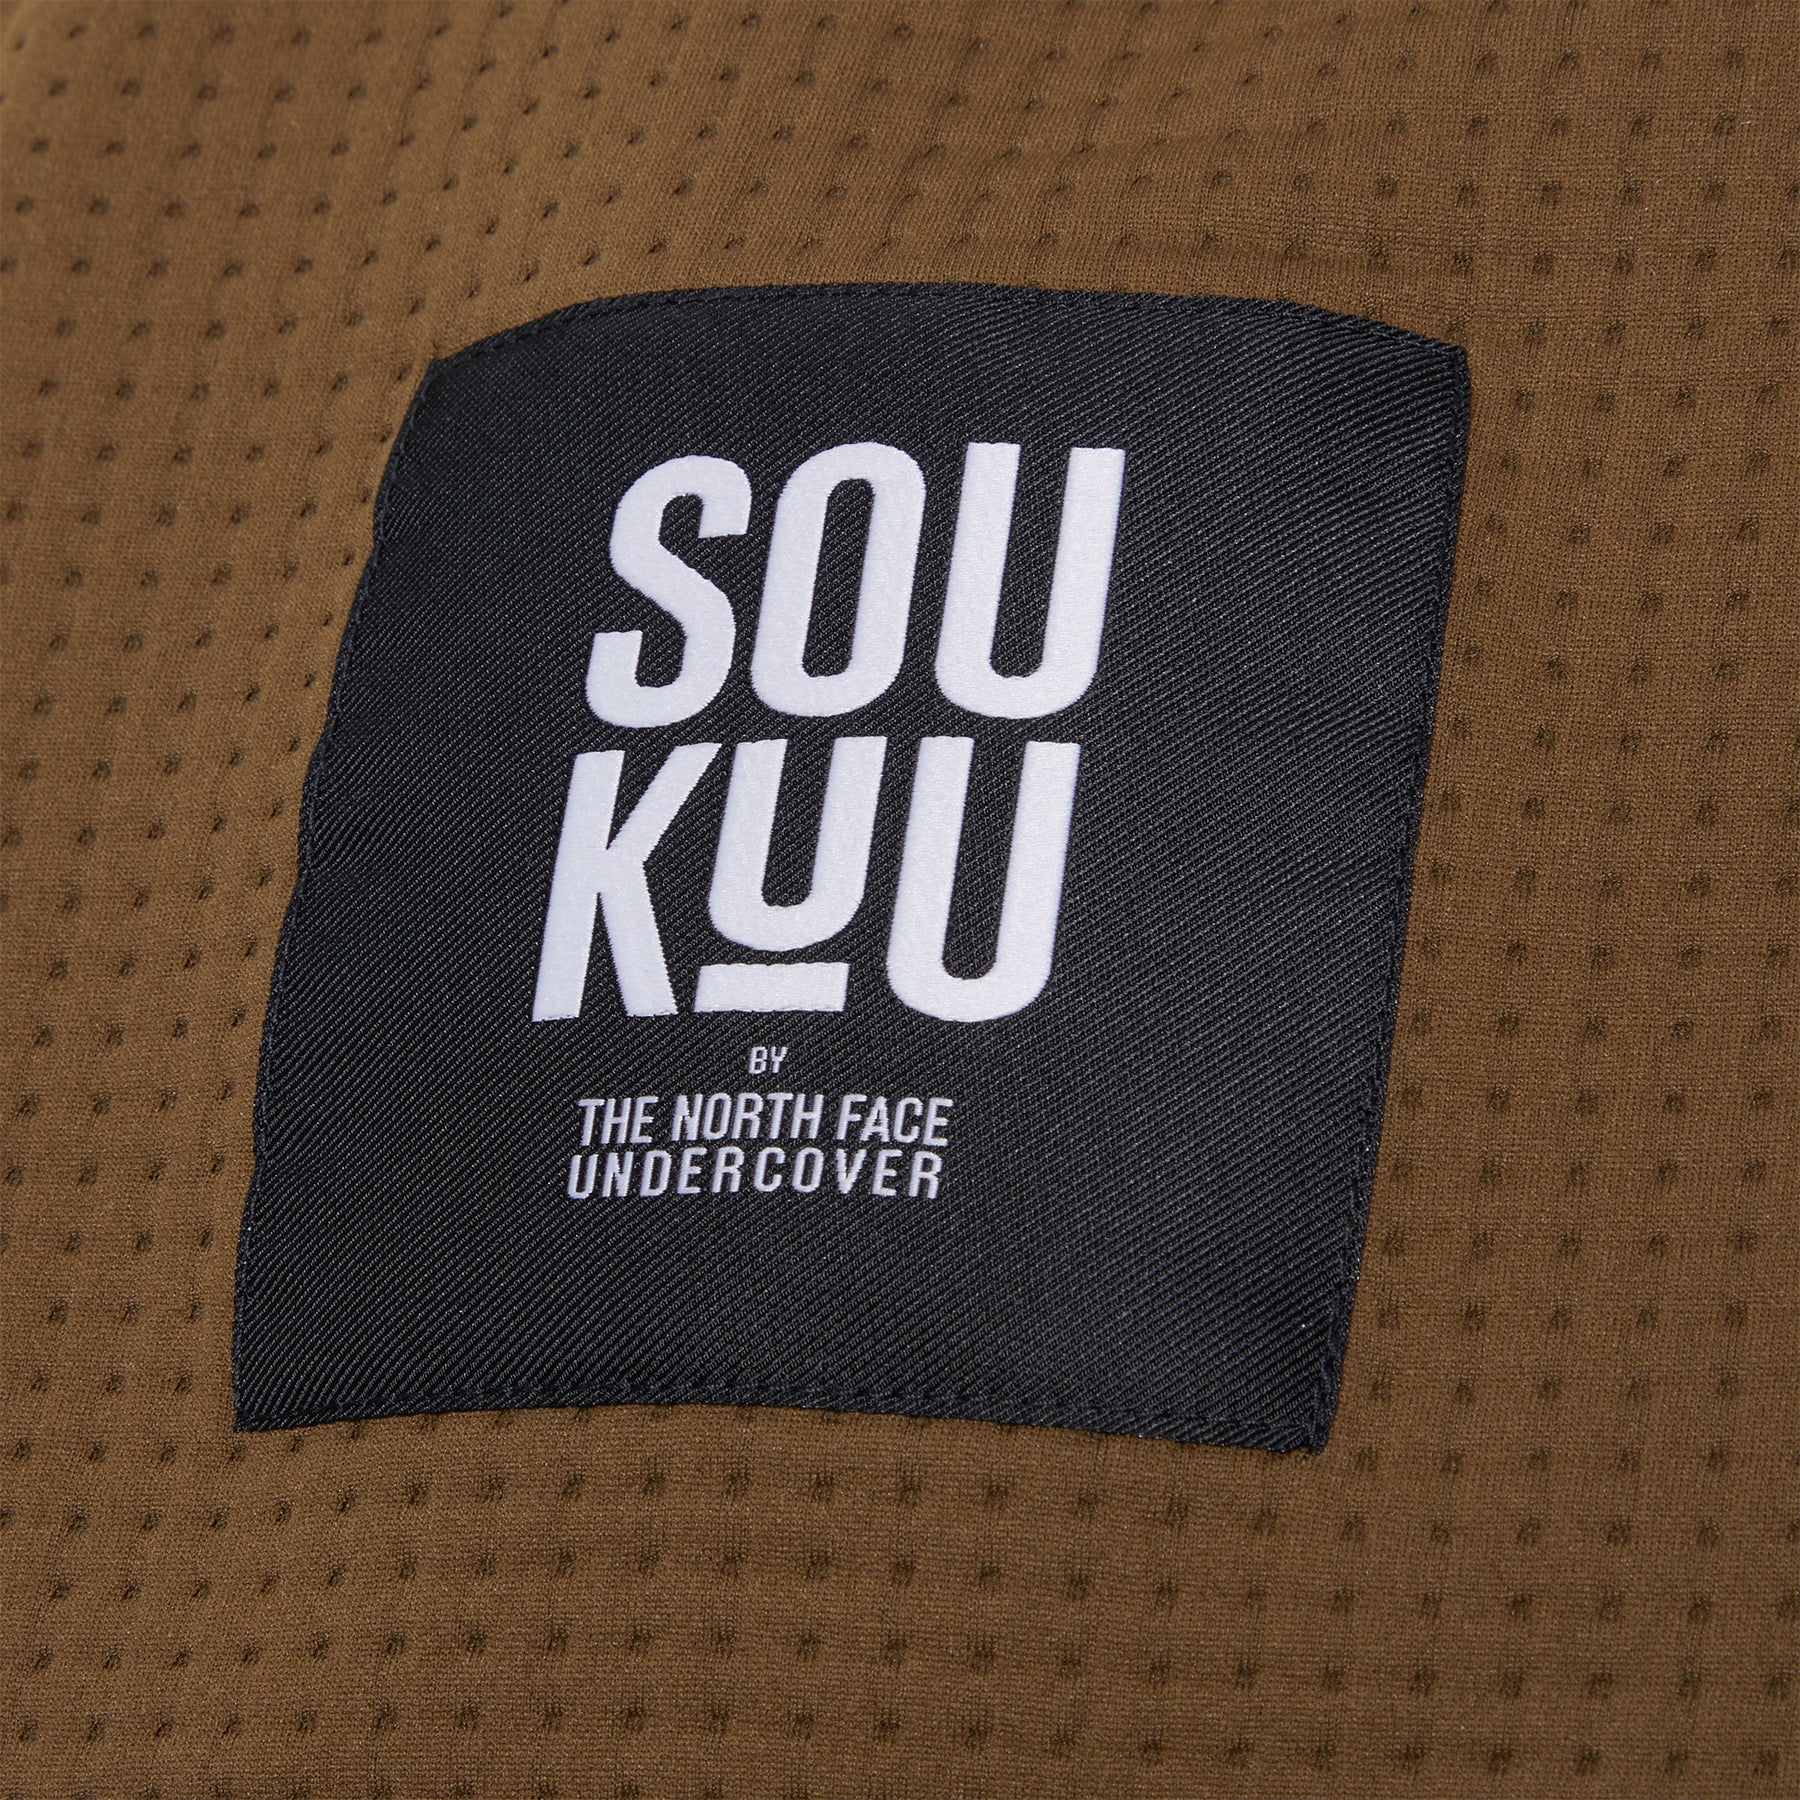 The North Face x Undercover Soukuu Dotknit T-Shirt Sepia Brown